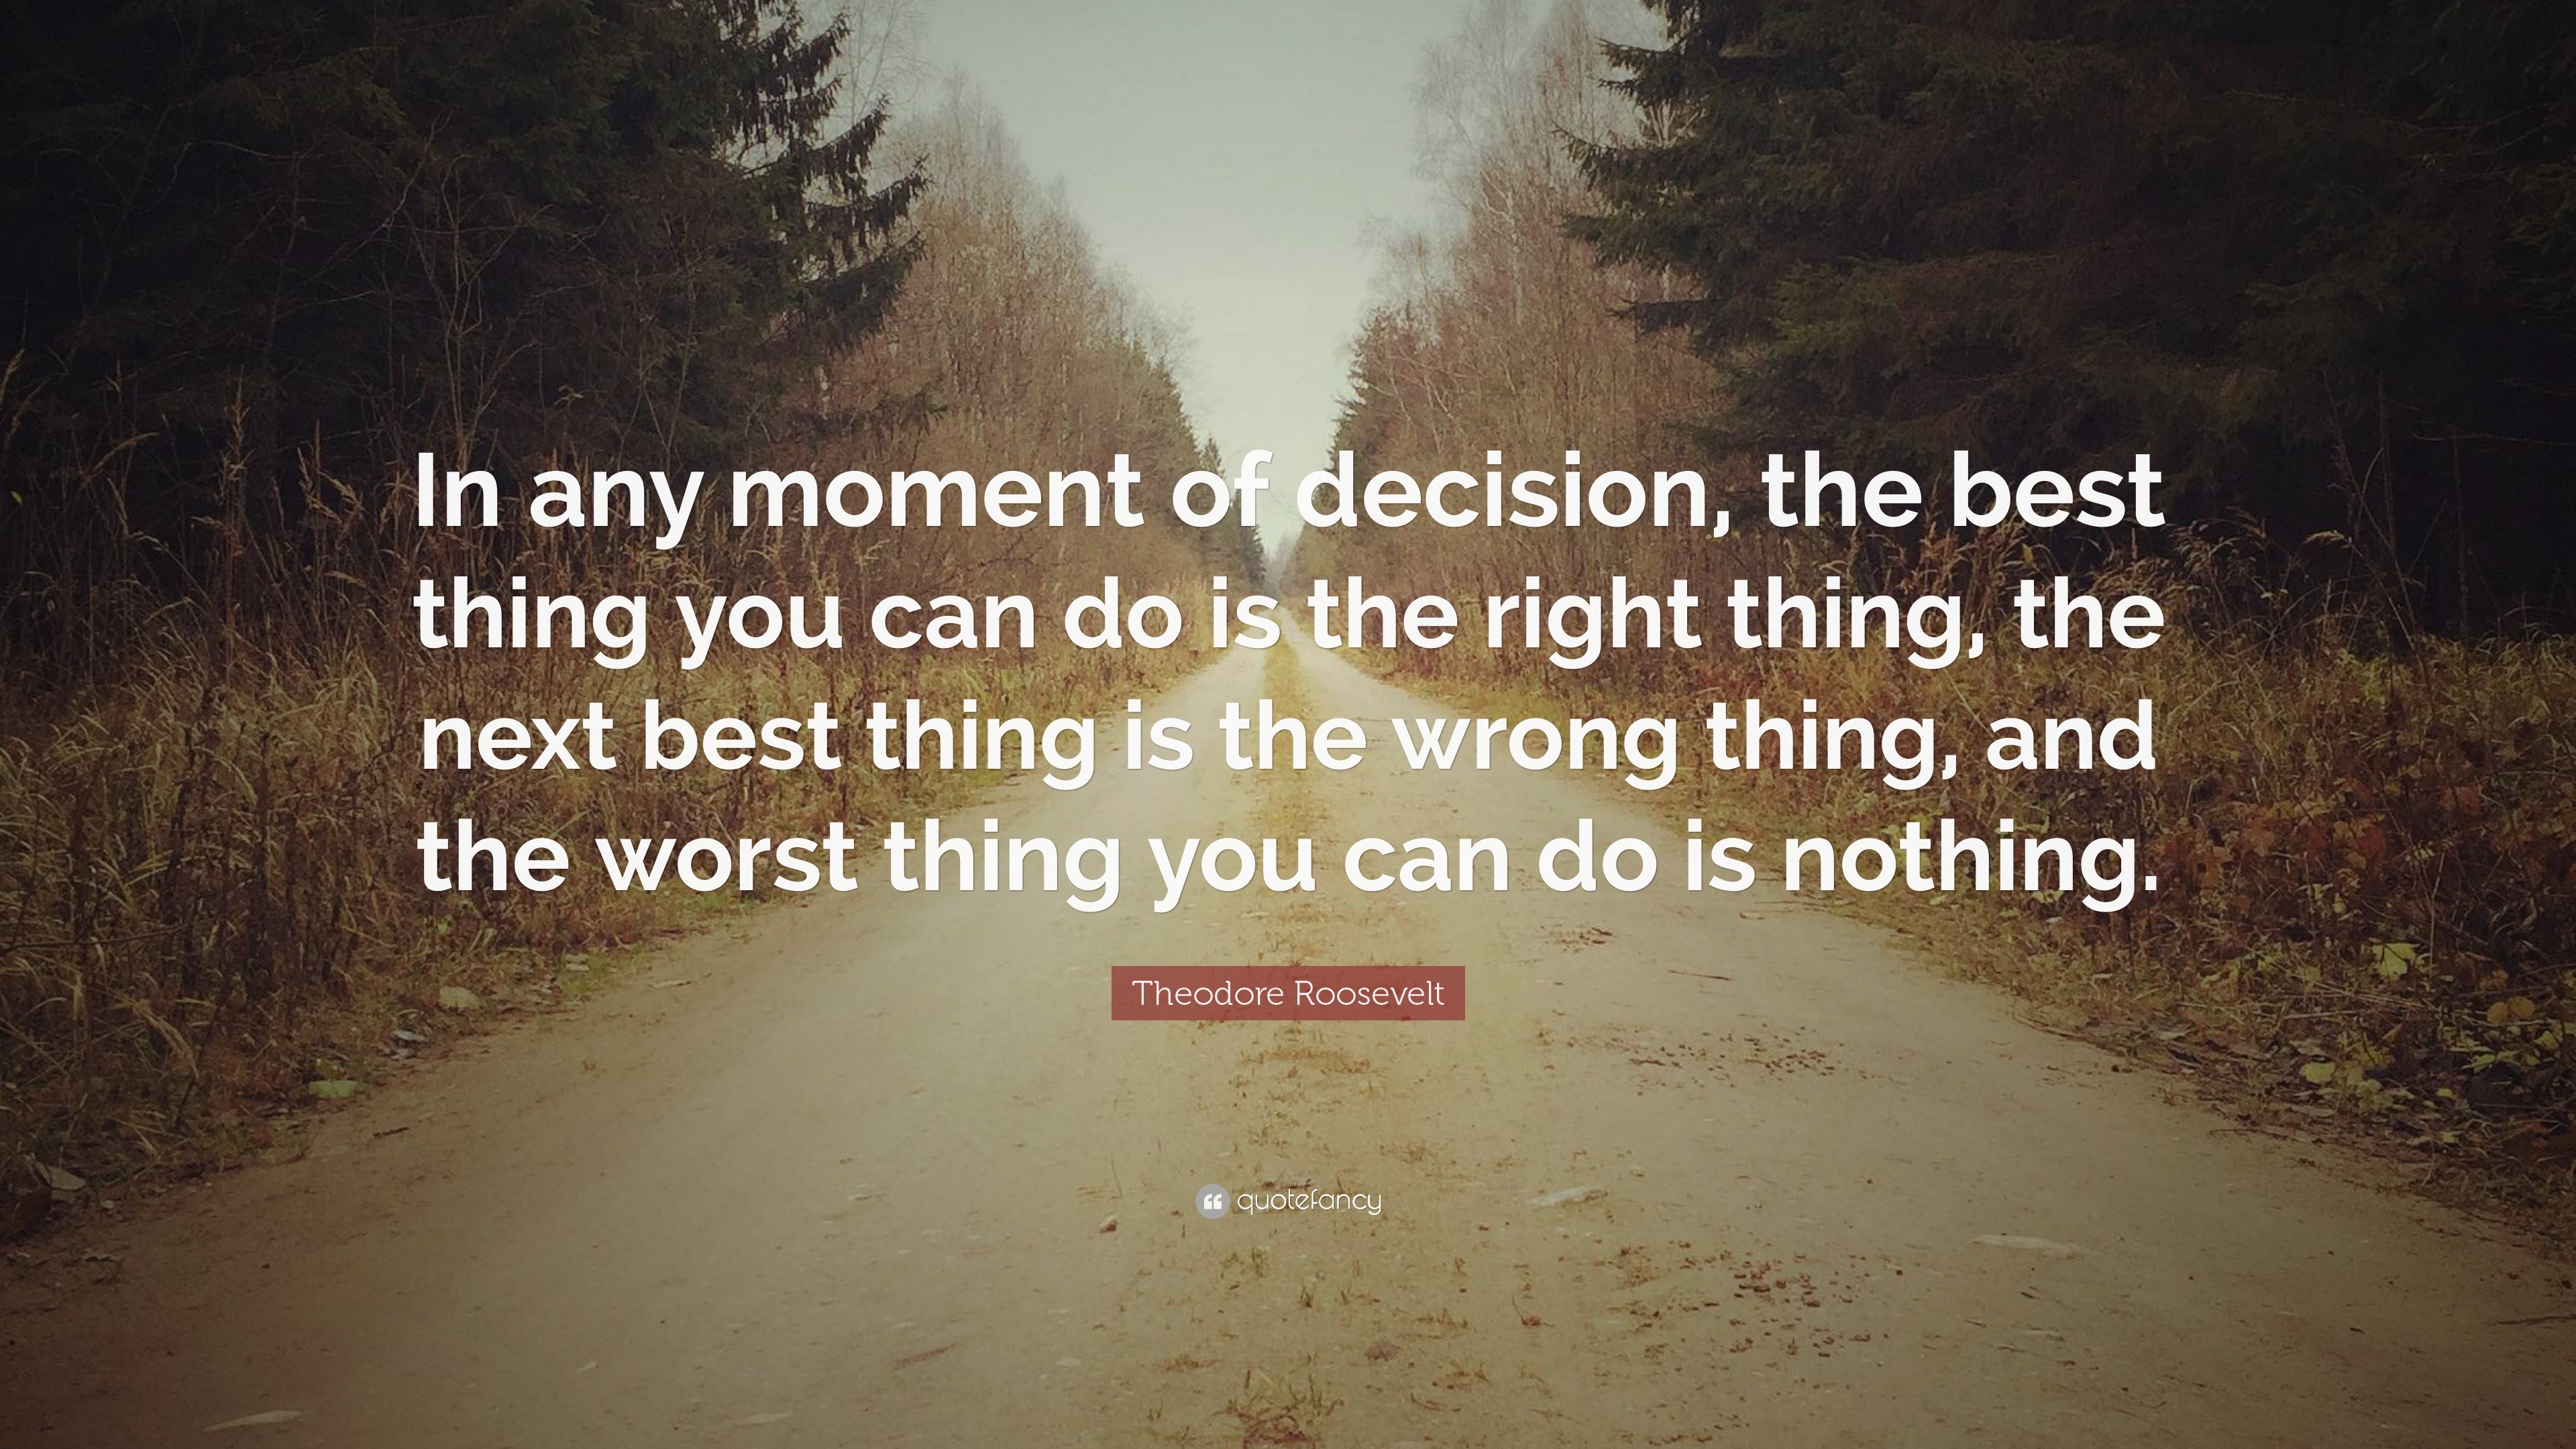 37882 Theodore Roosevelt Quote In any moment of decision the best thing